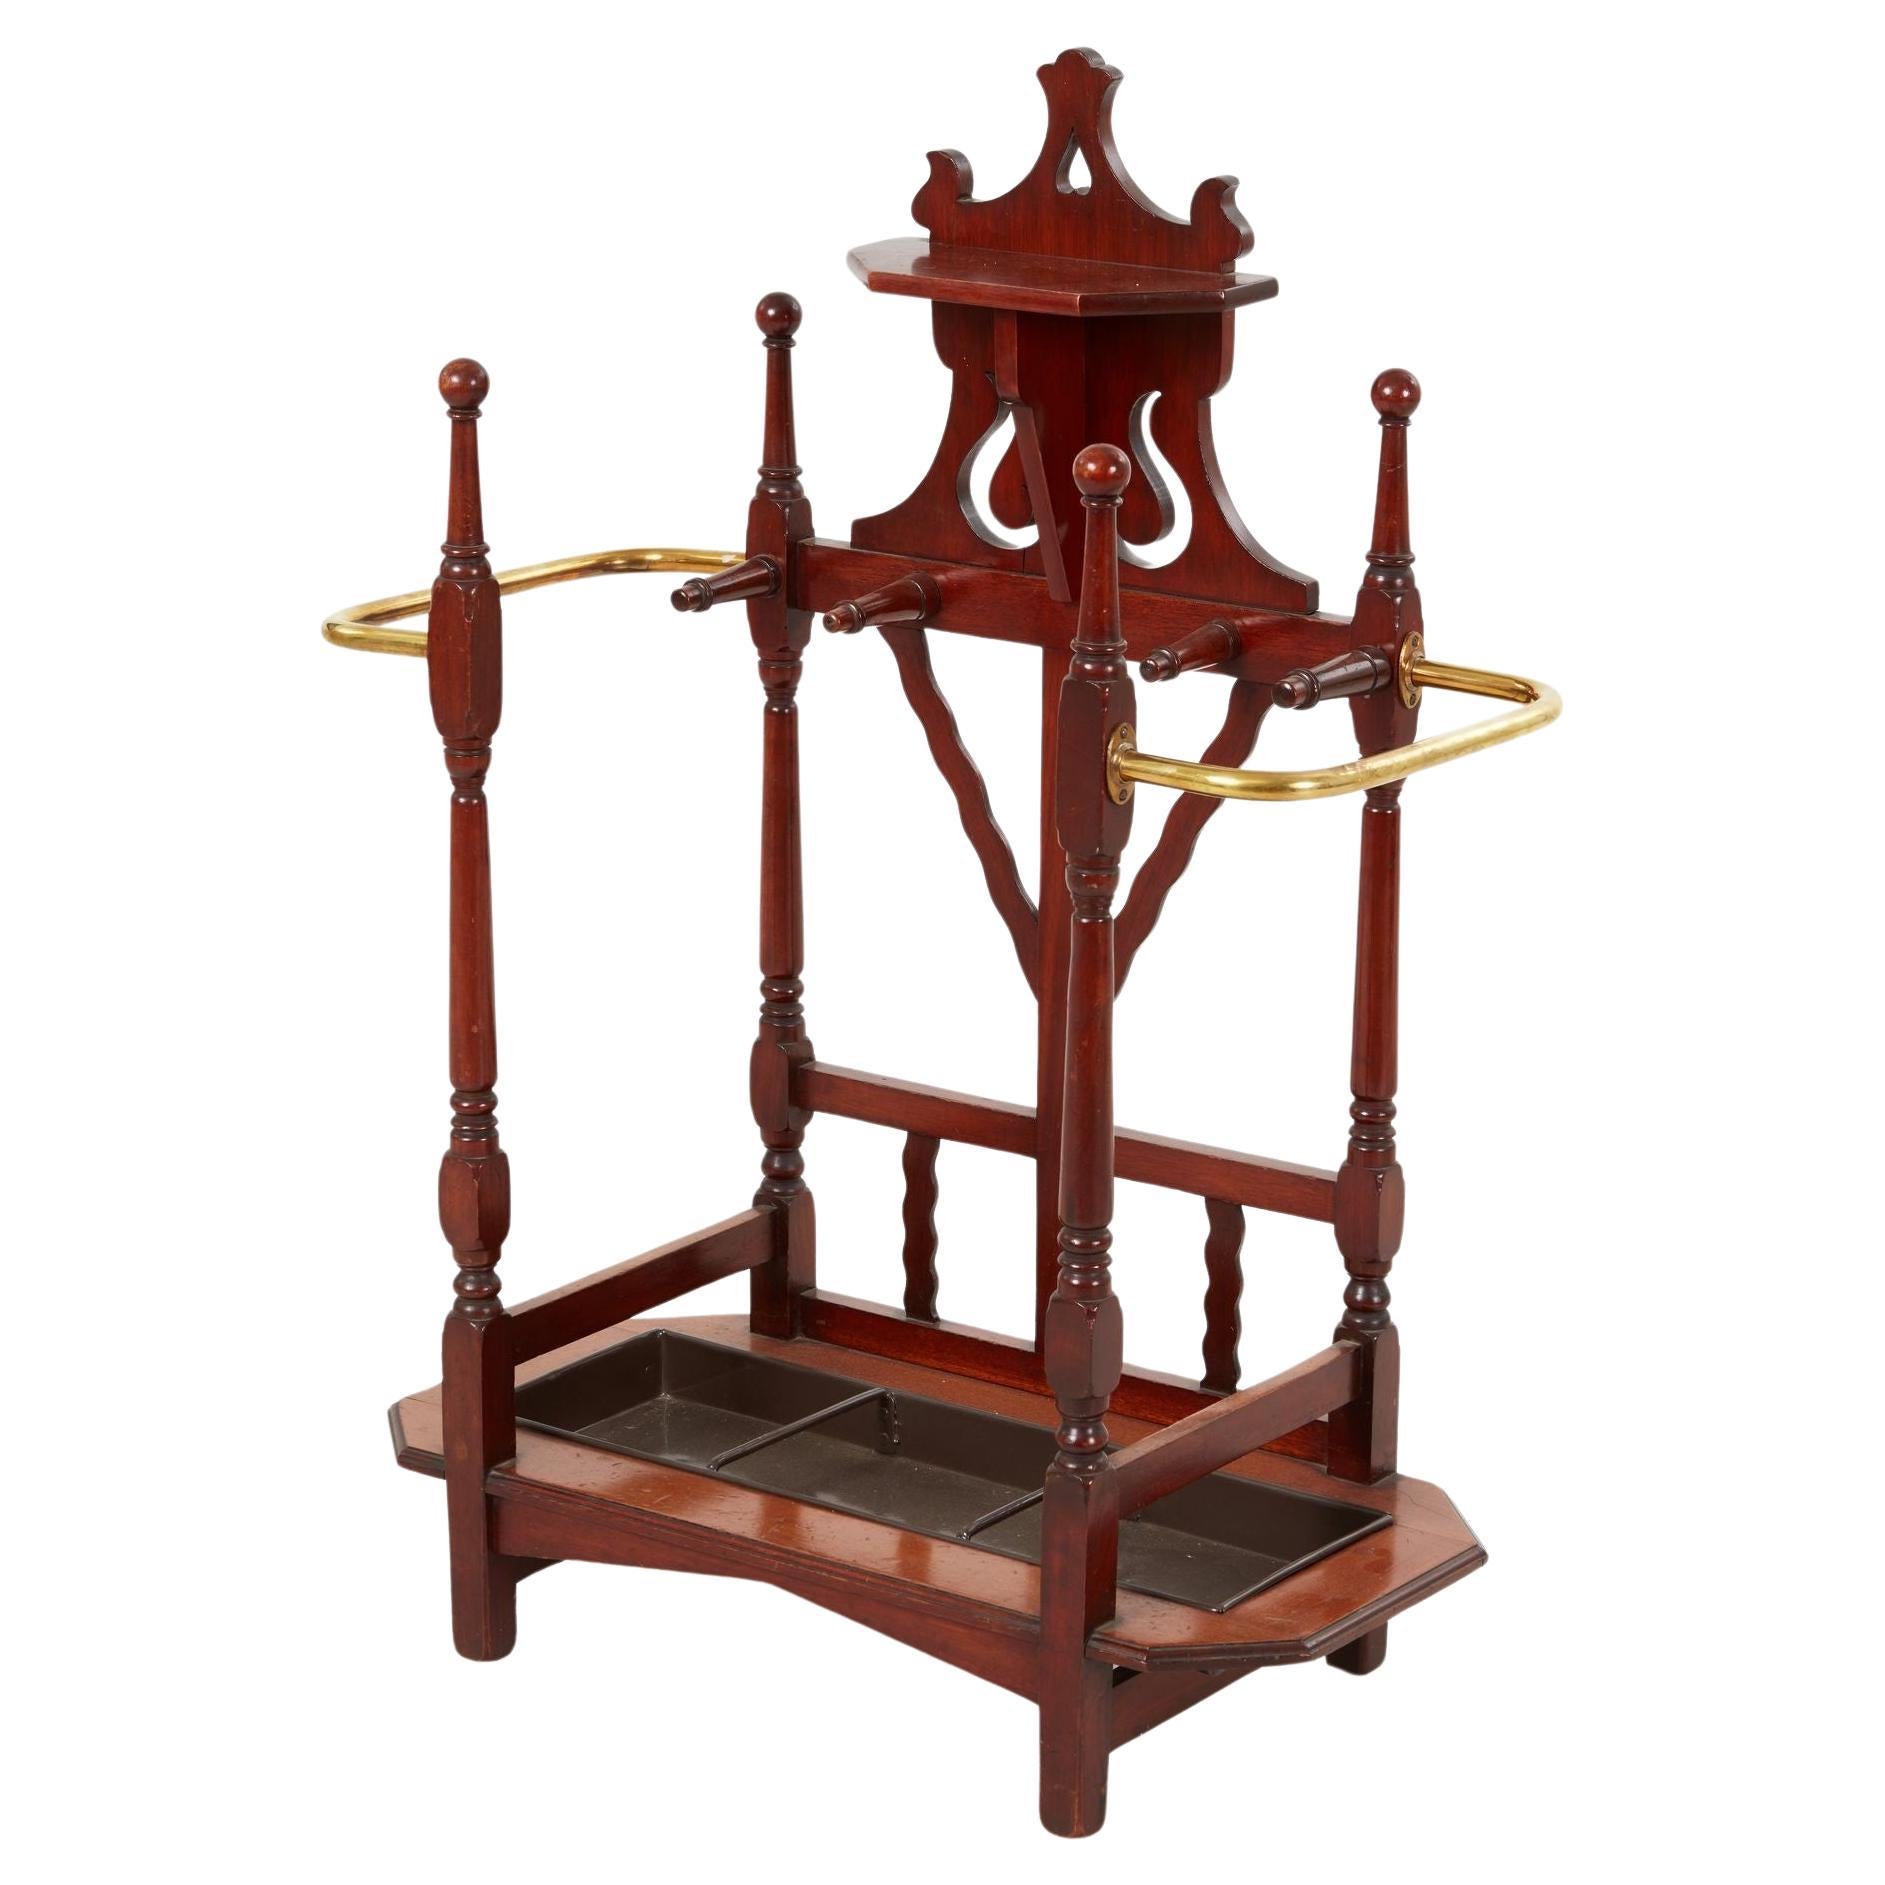 English Country House Umbrella Stand